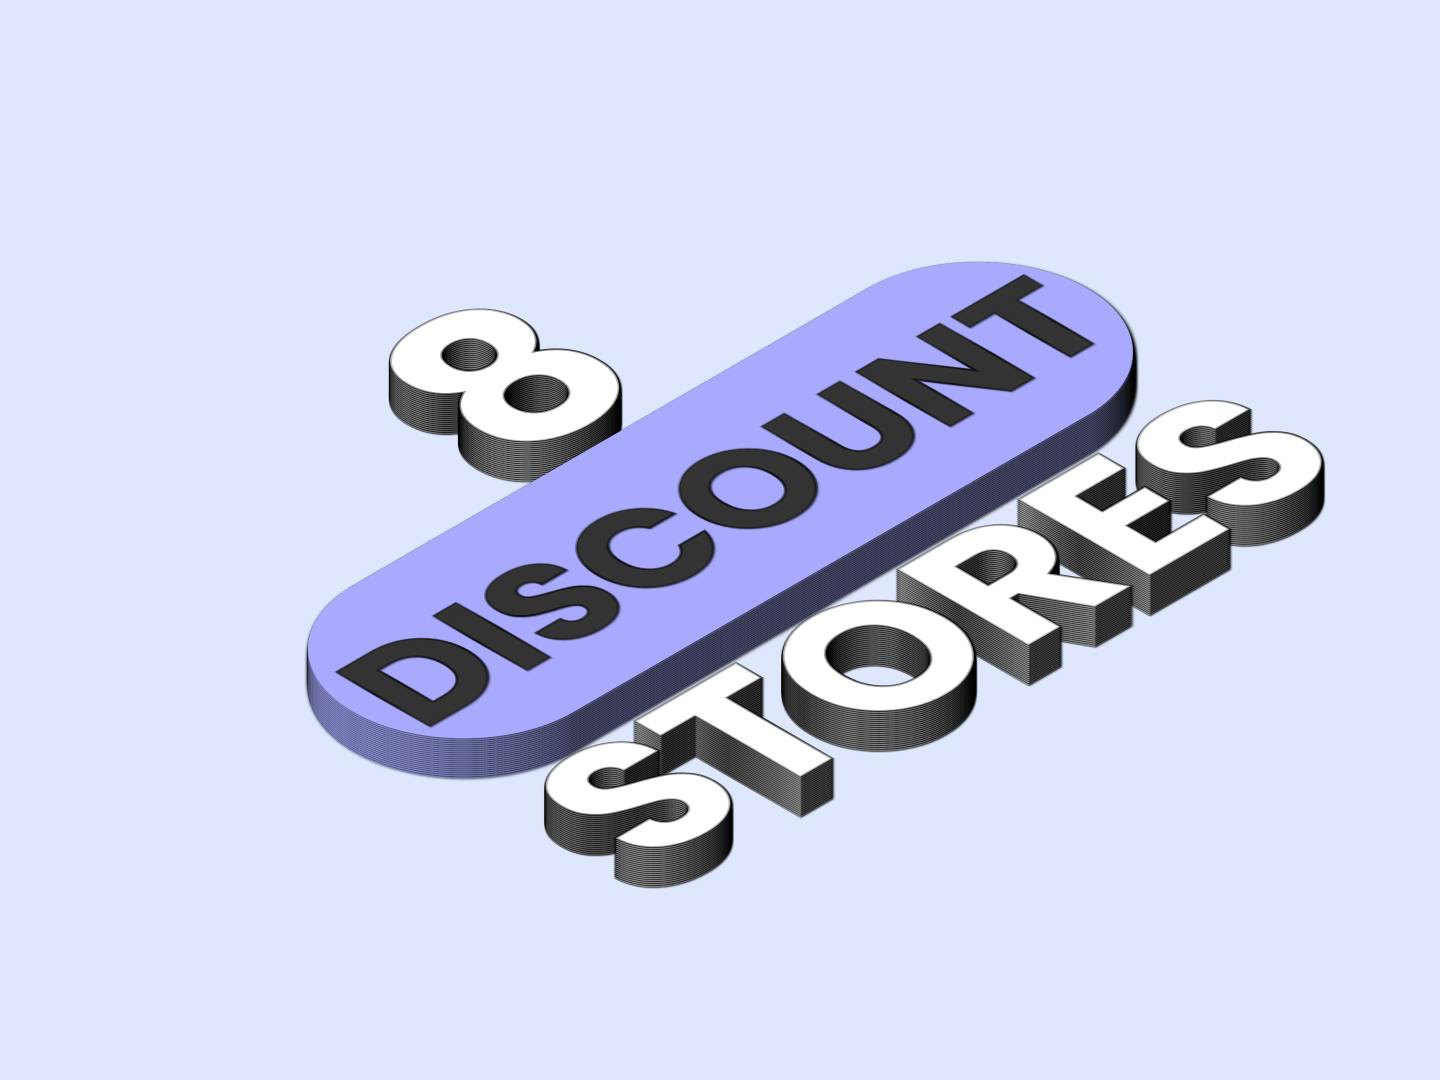 8 US discount stores